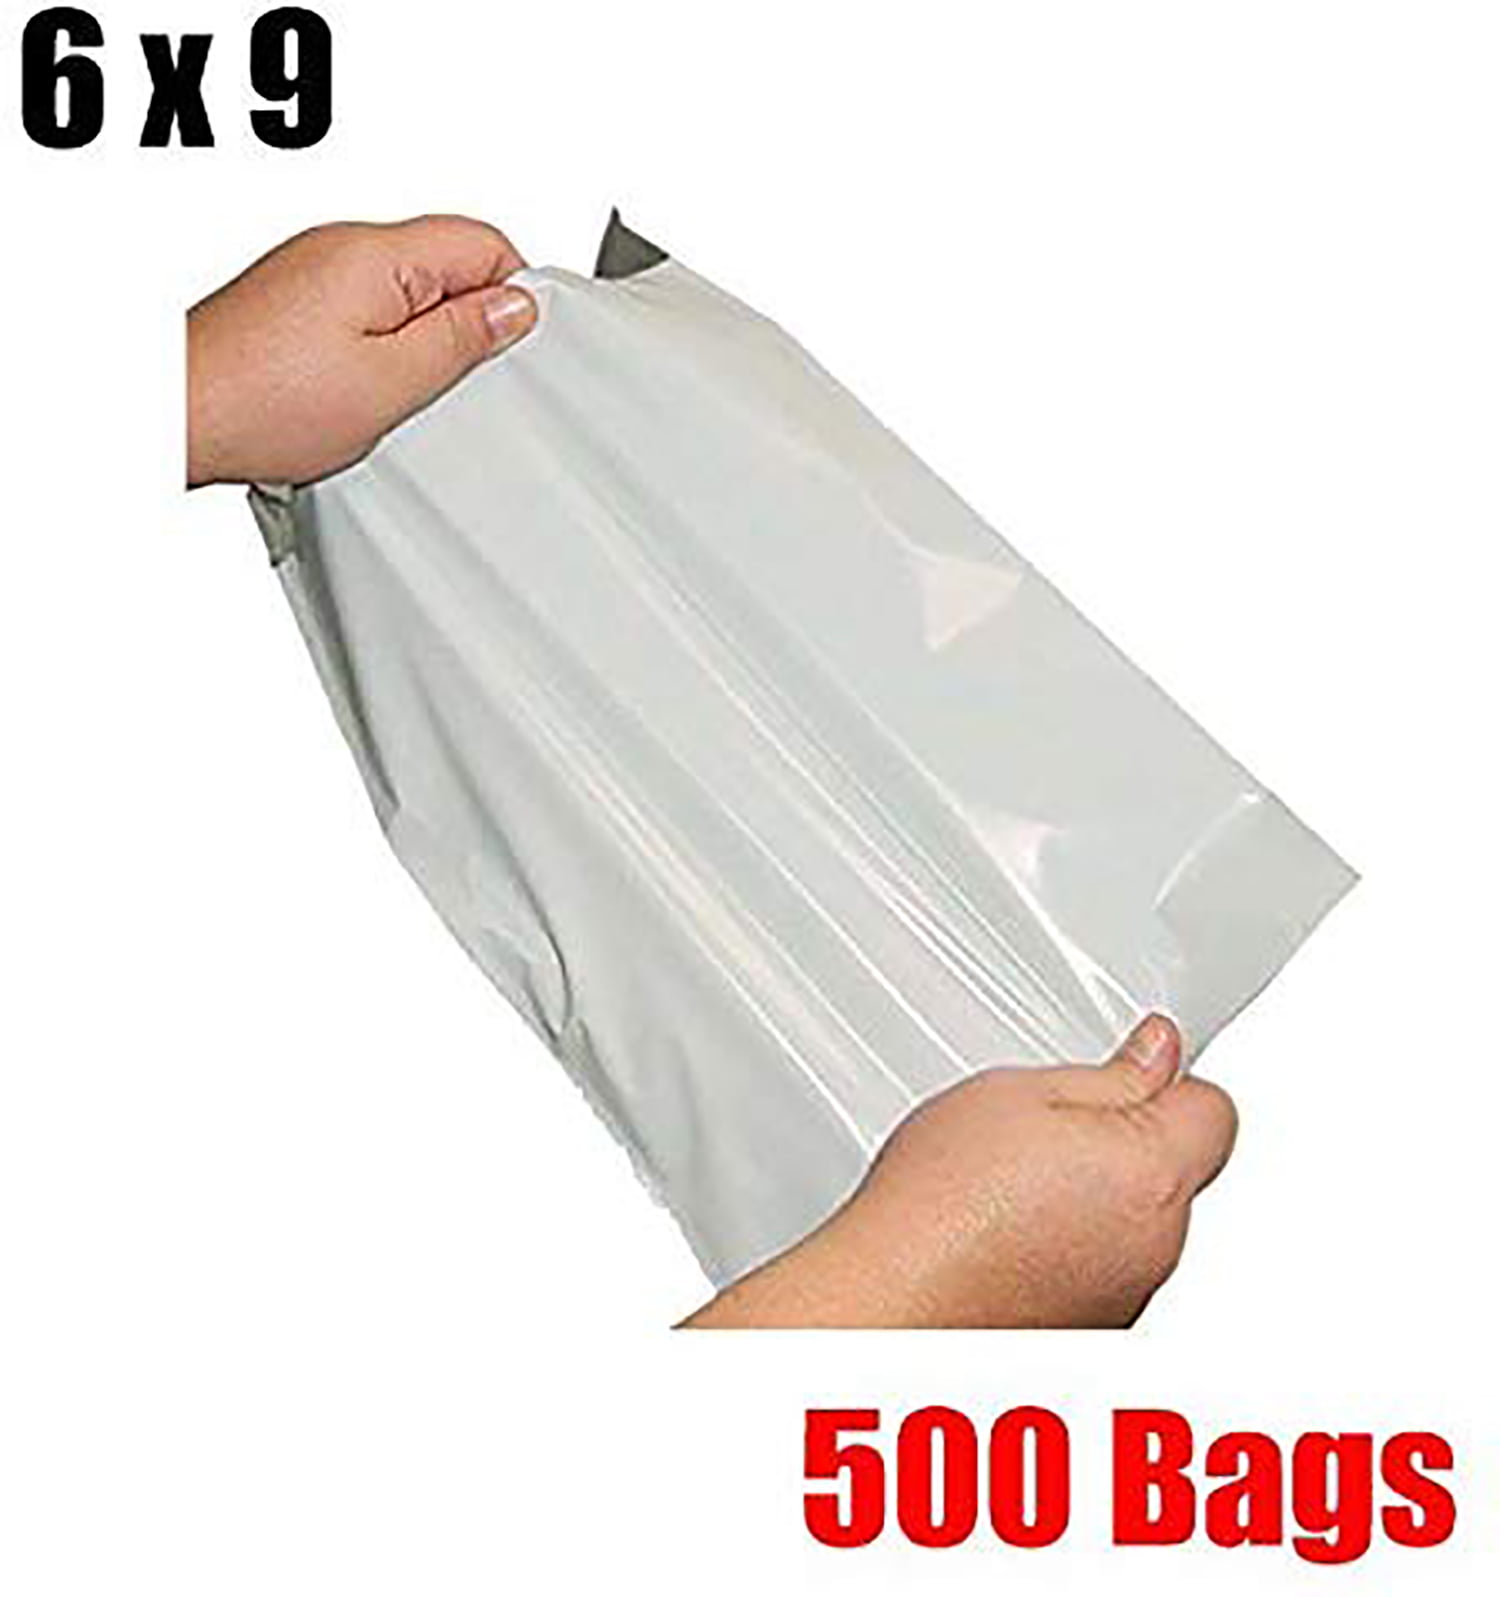 2000 6x9 2.5 Mil Privacy Shield Bags Poly Mailers Envelopes Shipping Self Seal 